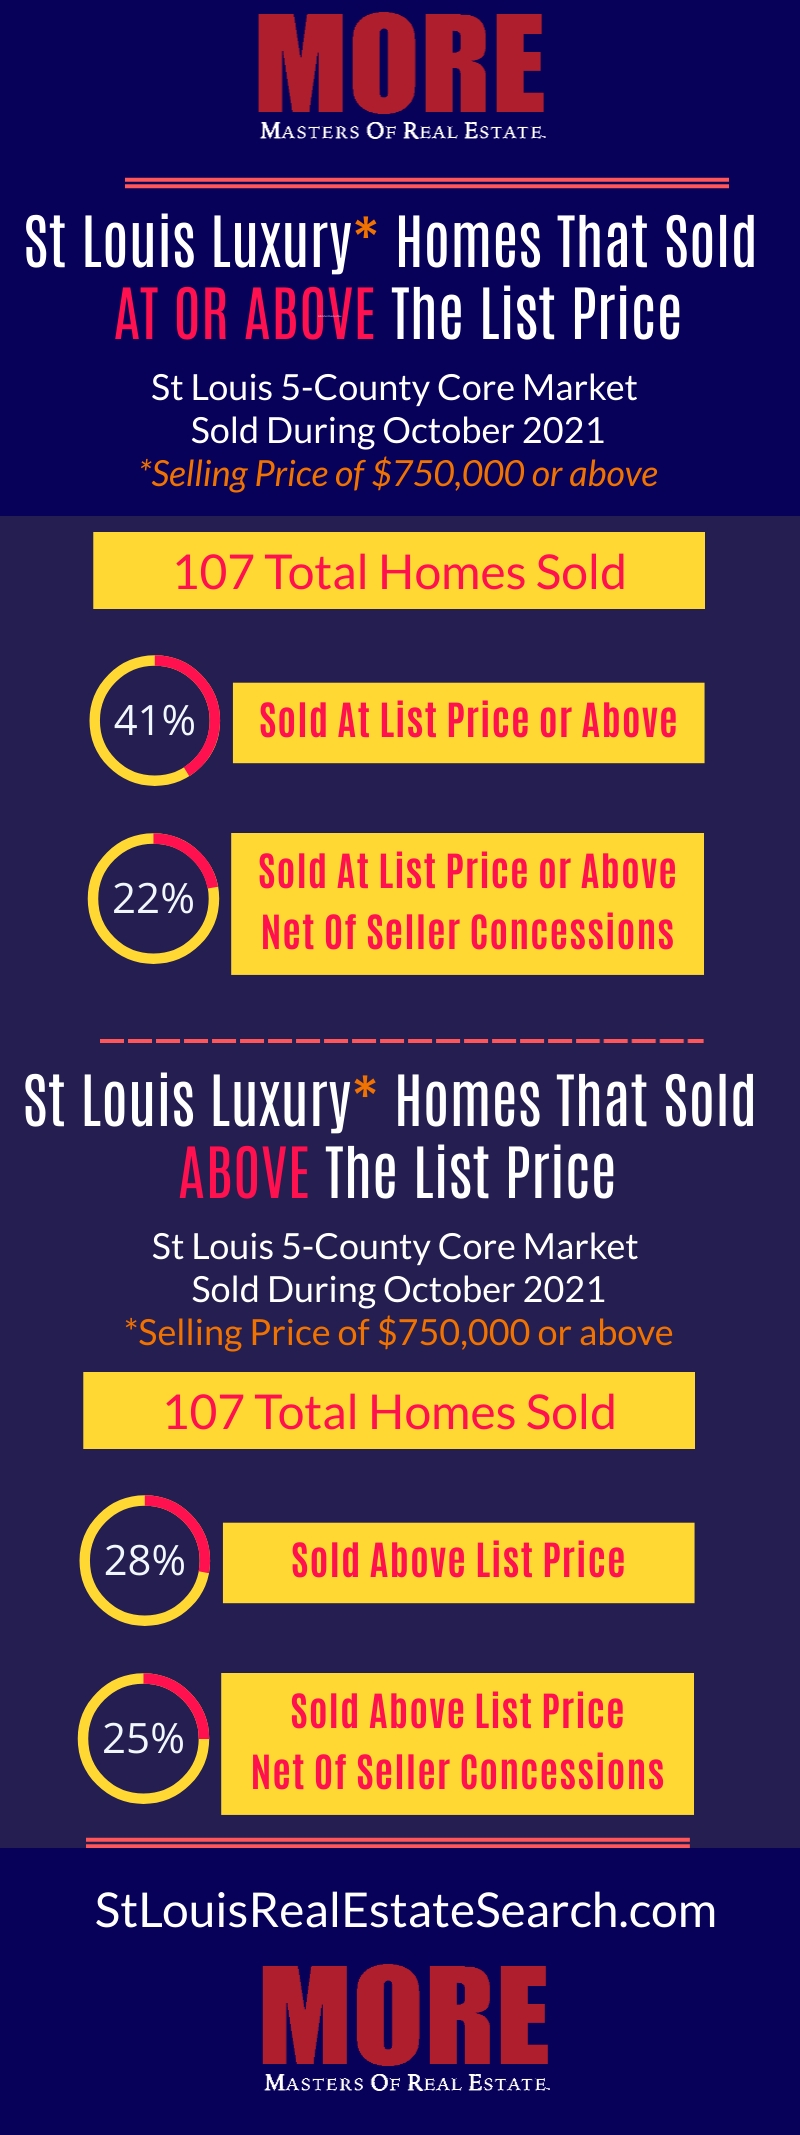 St. Louis luxury homes that sold at above list price October 20 21 infographic